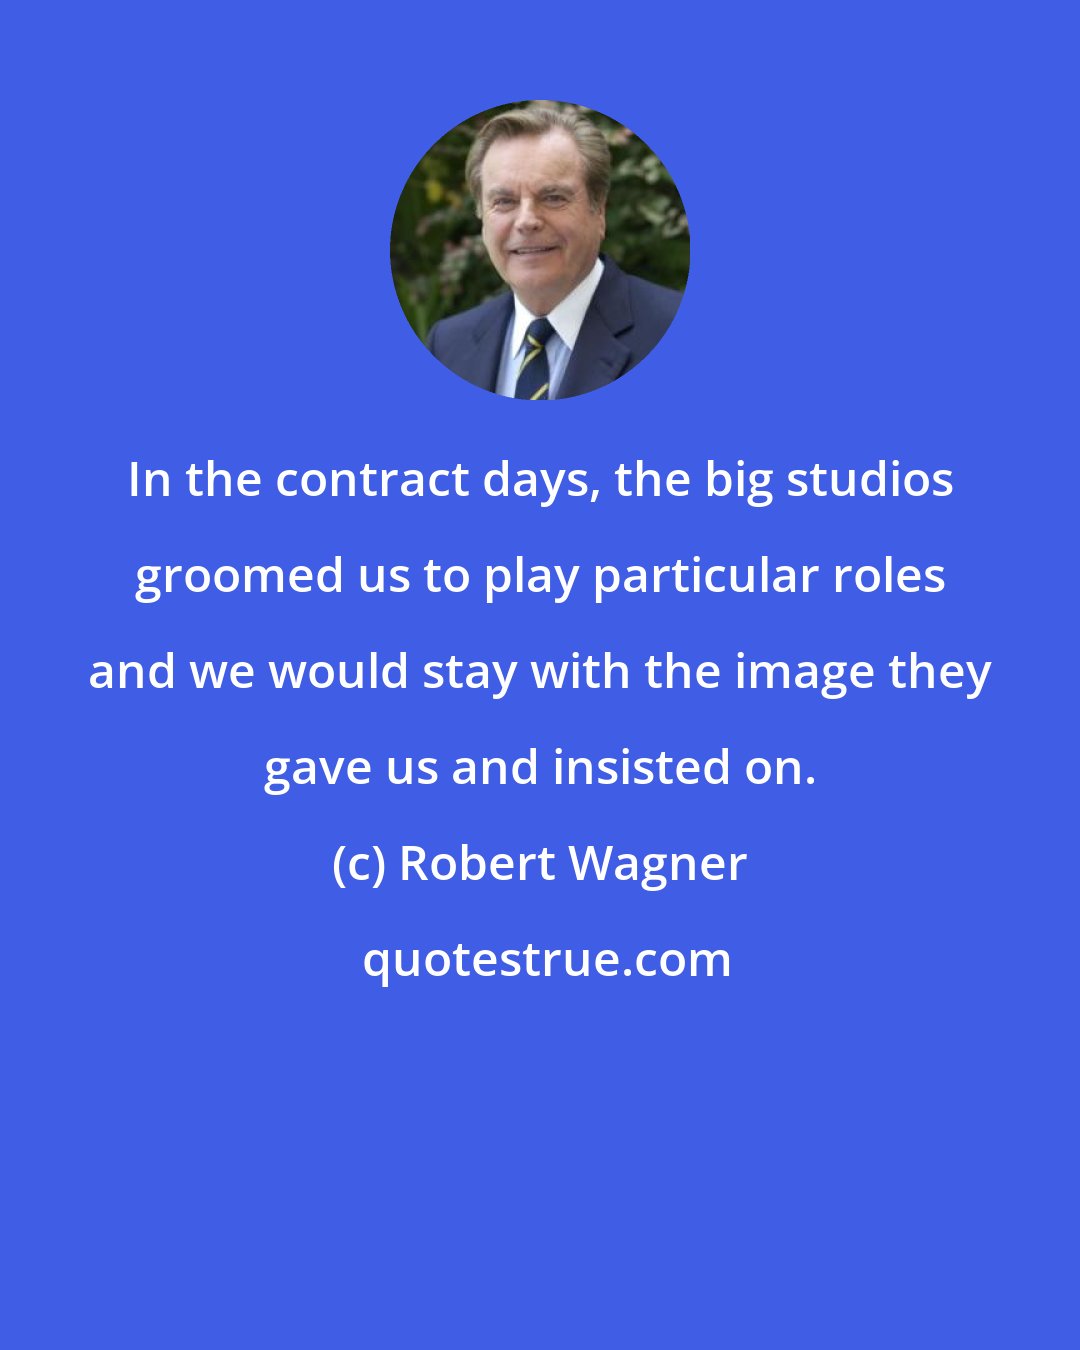 Robert Wagner: In the contract days, the big studios groomed us to play particular roles and we would stay with the image they gave us and insisted on.